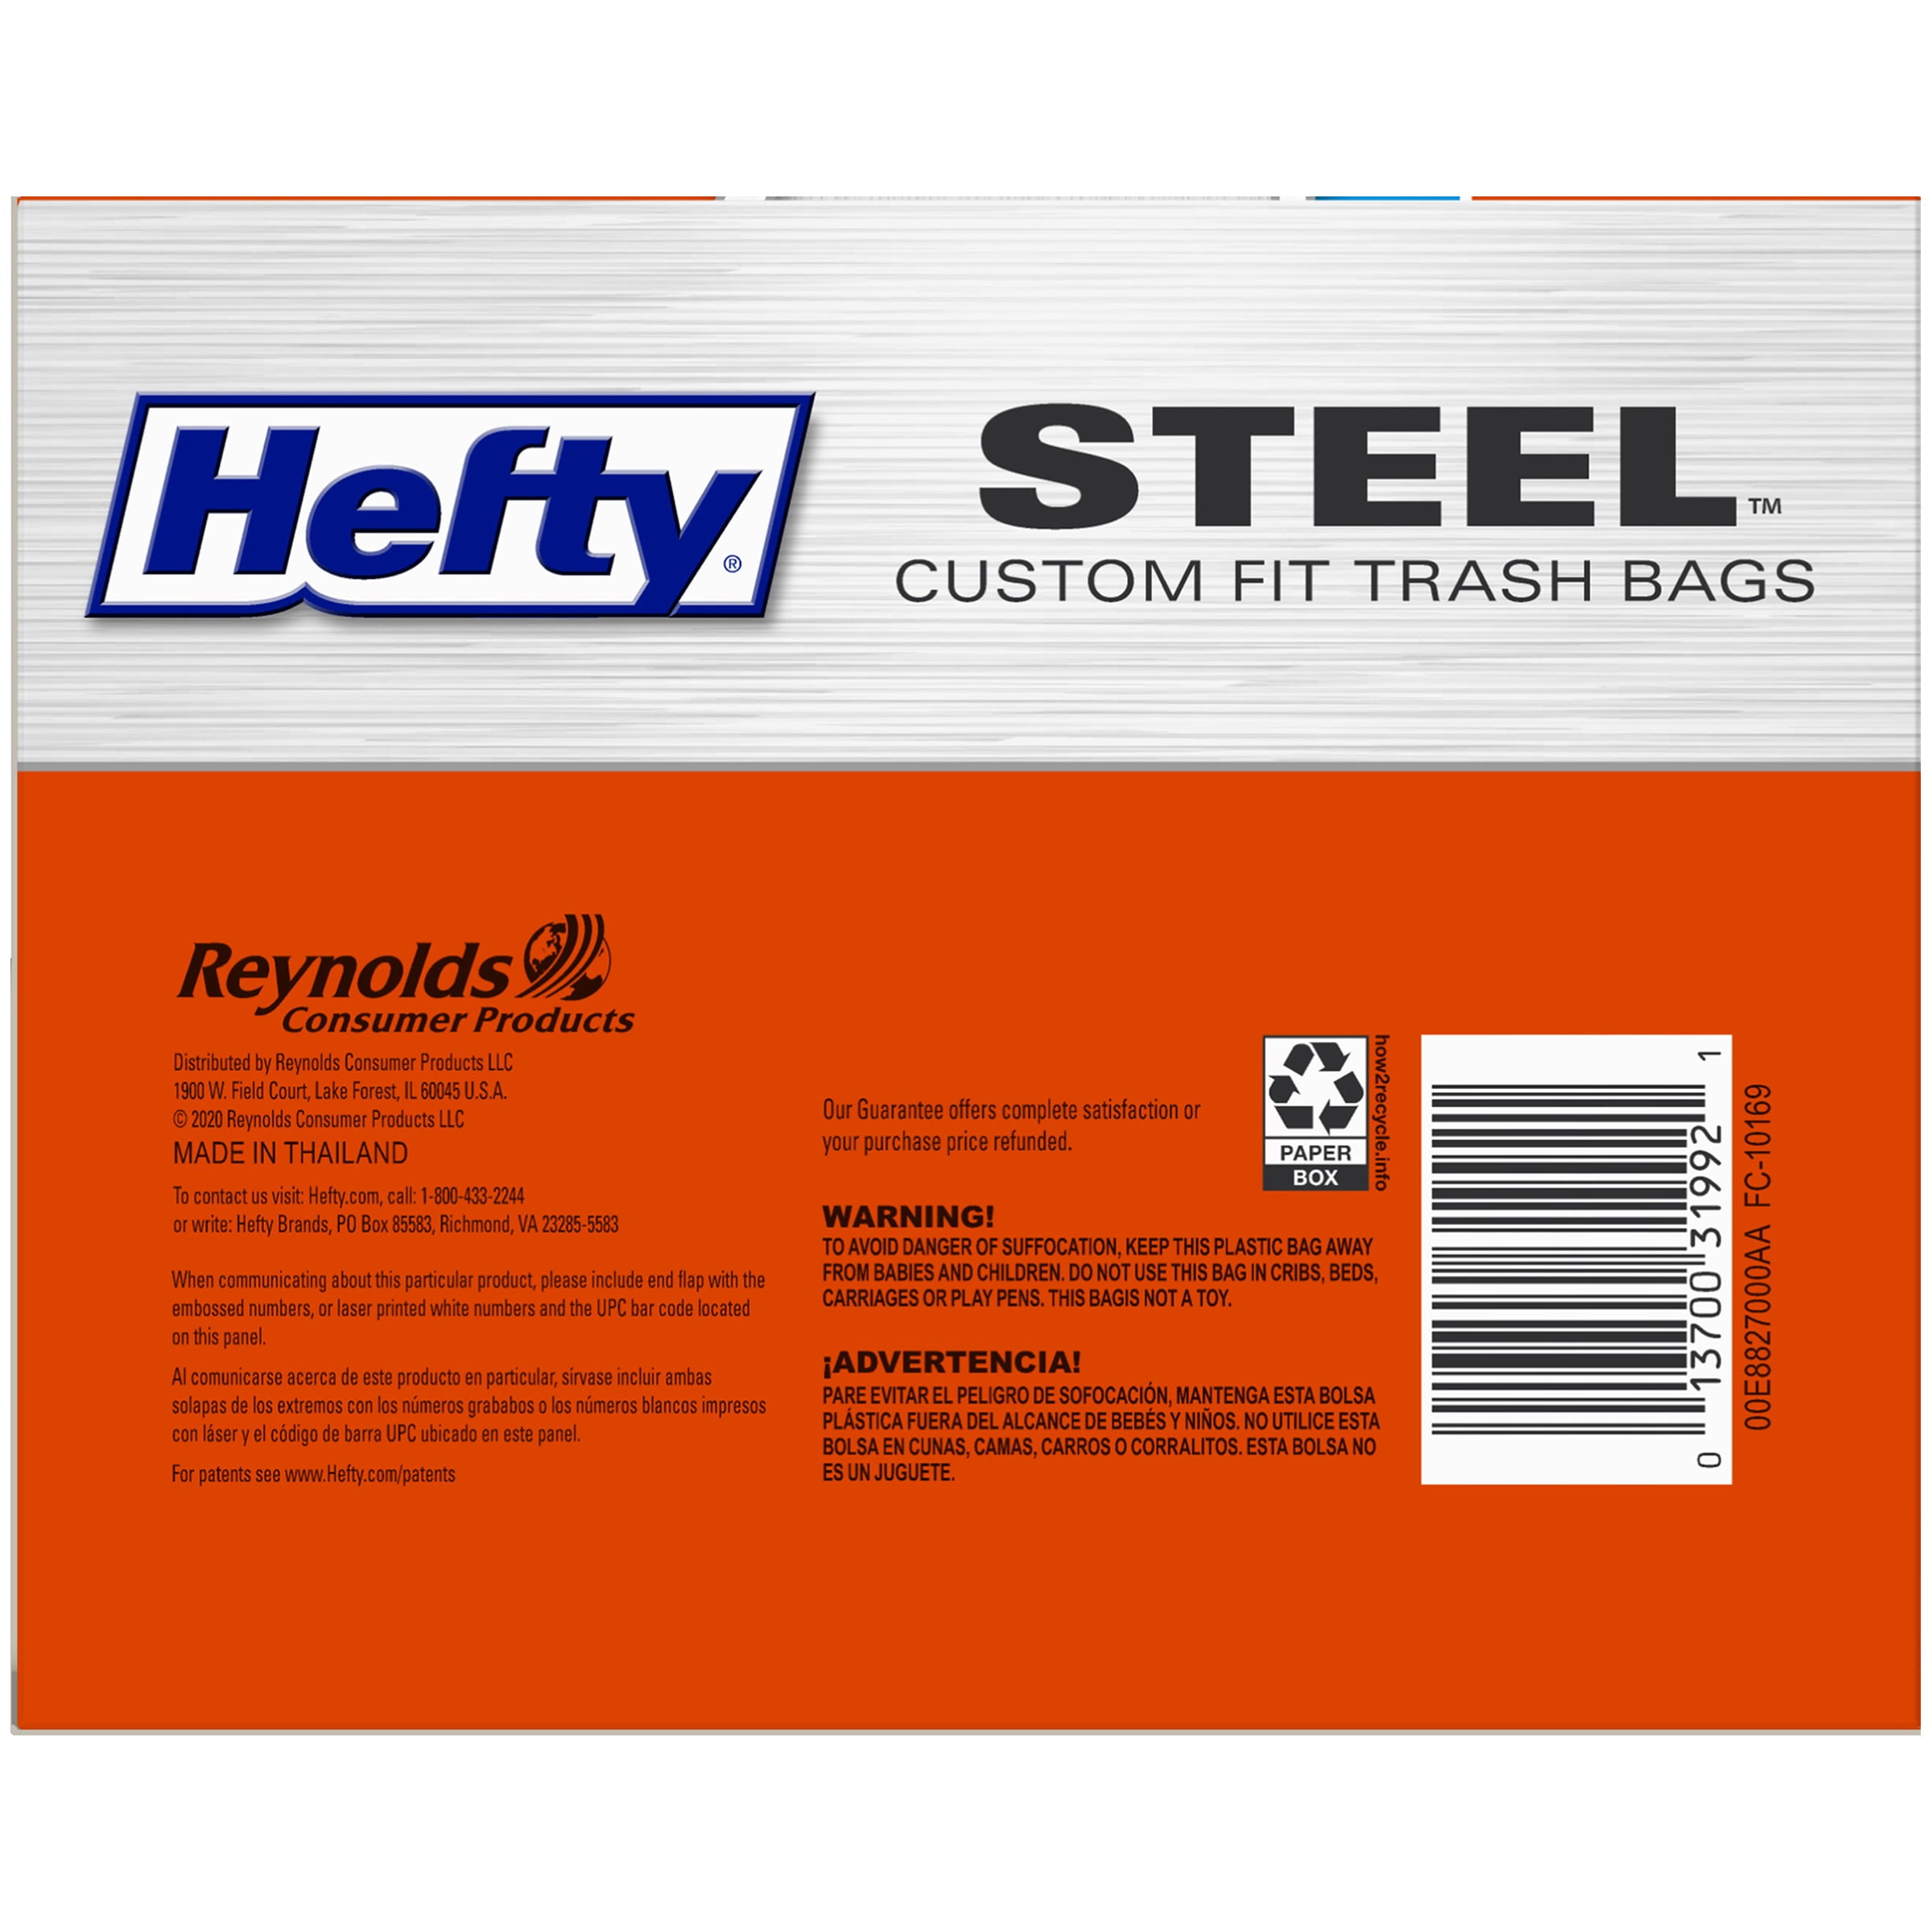 Hefty Steel Custom Fit B Size Drawstring Trash Bags, Black, Unscented, 3.2  Gallon, 20 Count